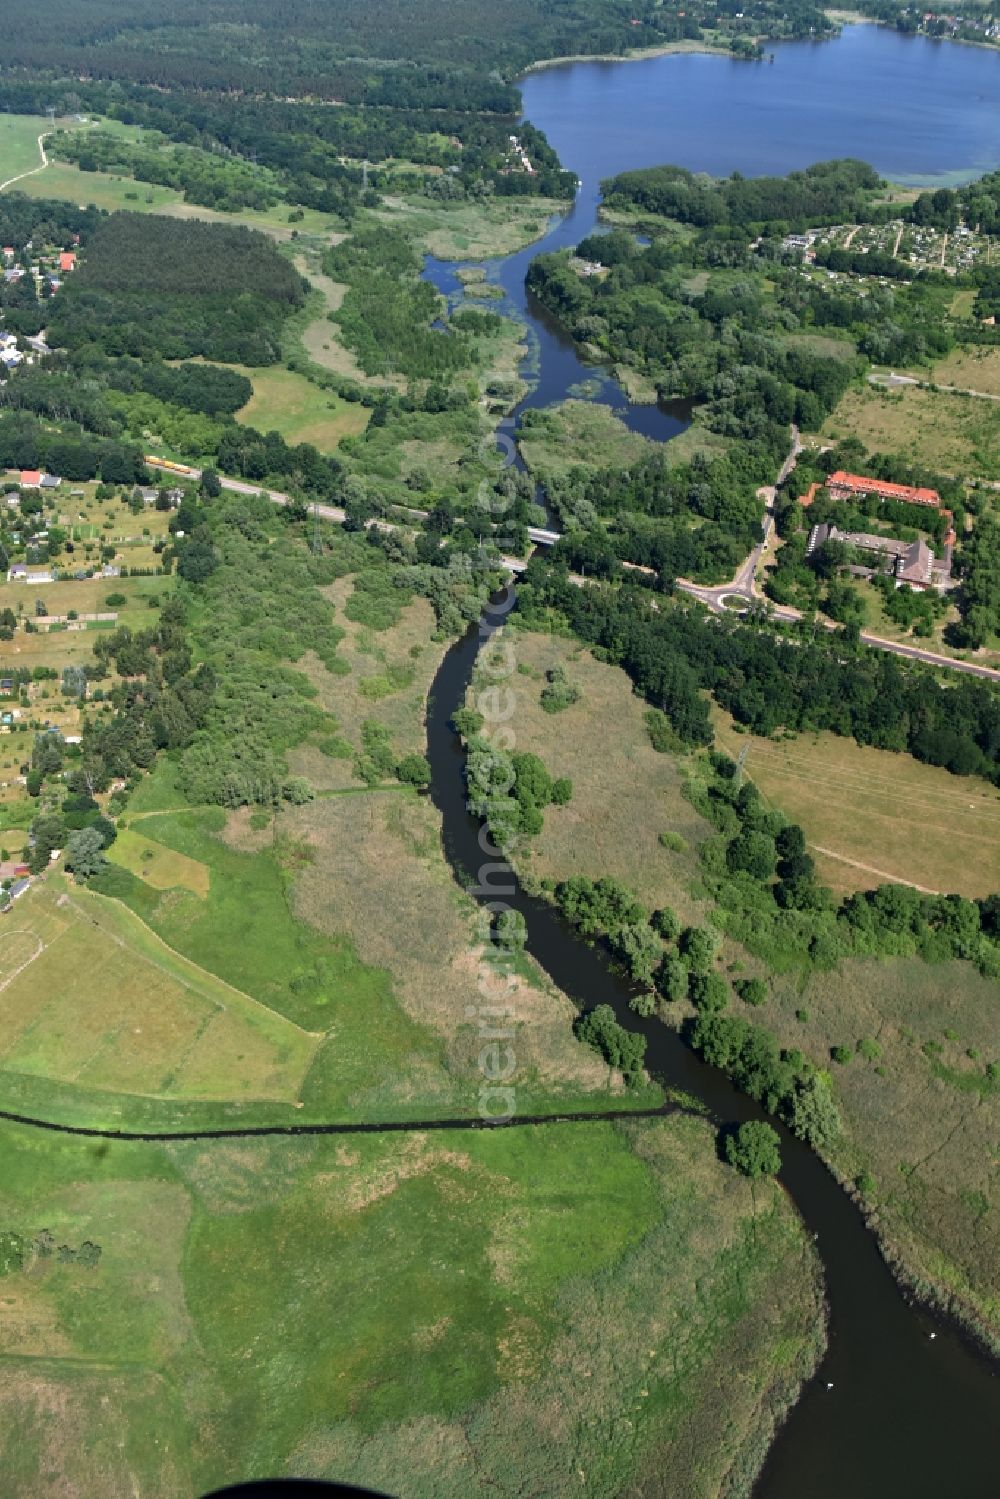 Aerial image Wusterwitz - Course of the river Die Fahrt between Kirchmoeser and Wusterwitz in the state of Brandenburg. The river connects the lakes Wendsee in the North and Grosser Wusterwitzer See in the South